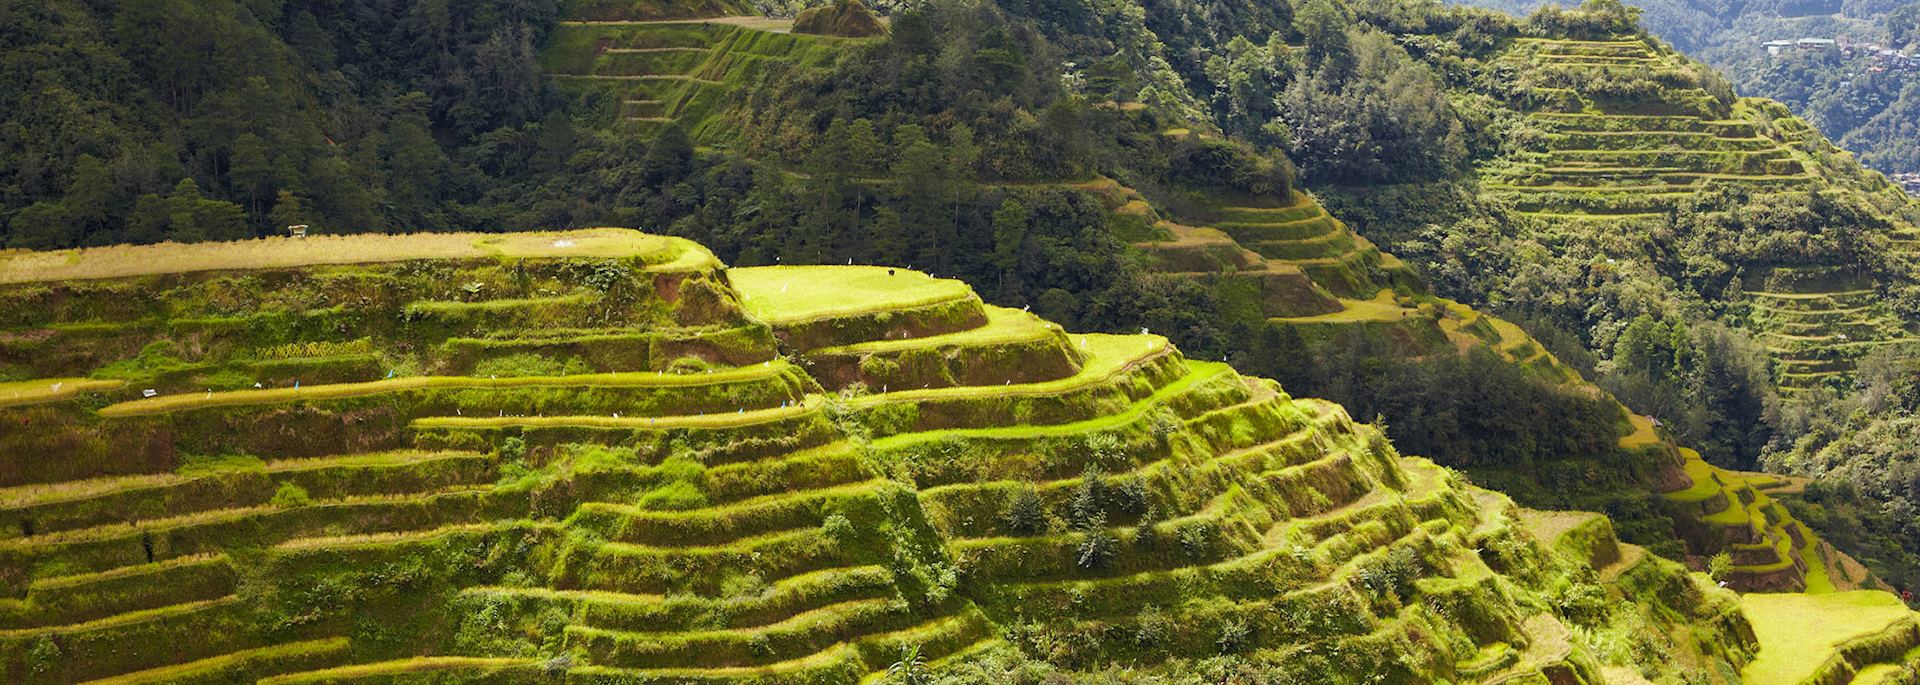 Rice terraces in Banaue, the Philippines